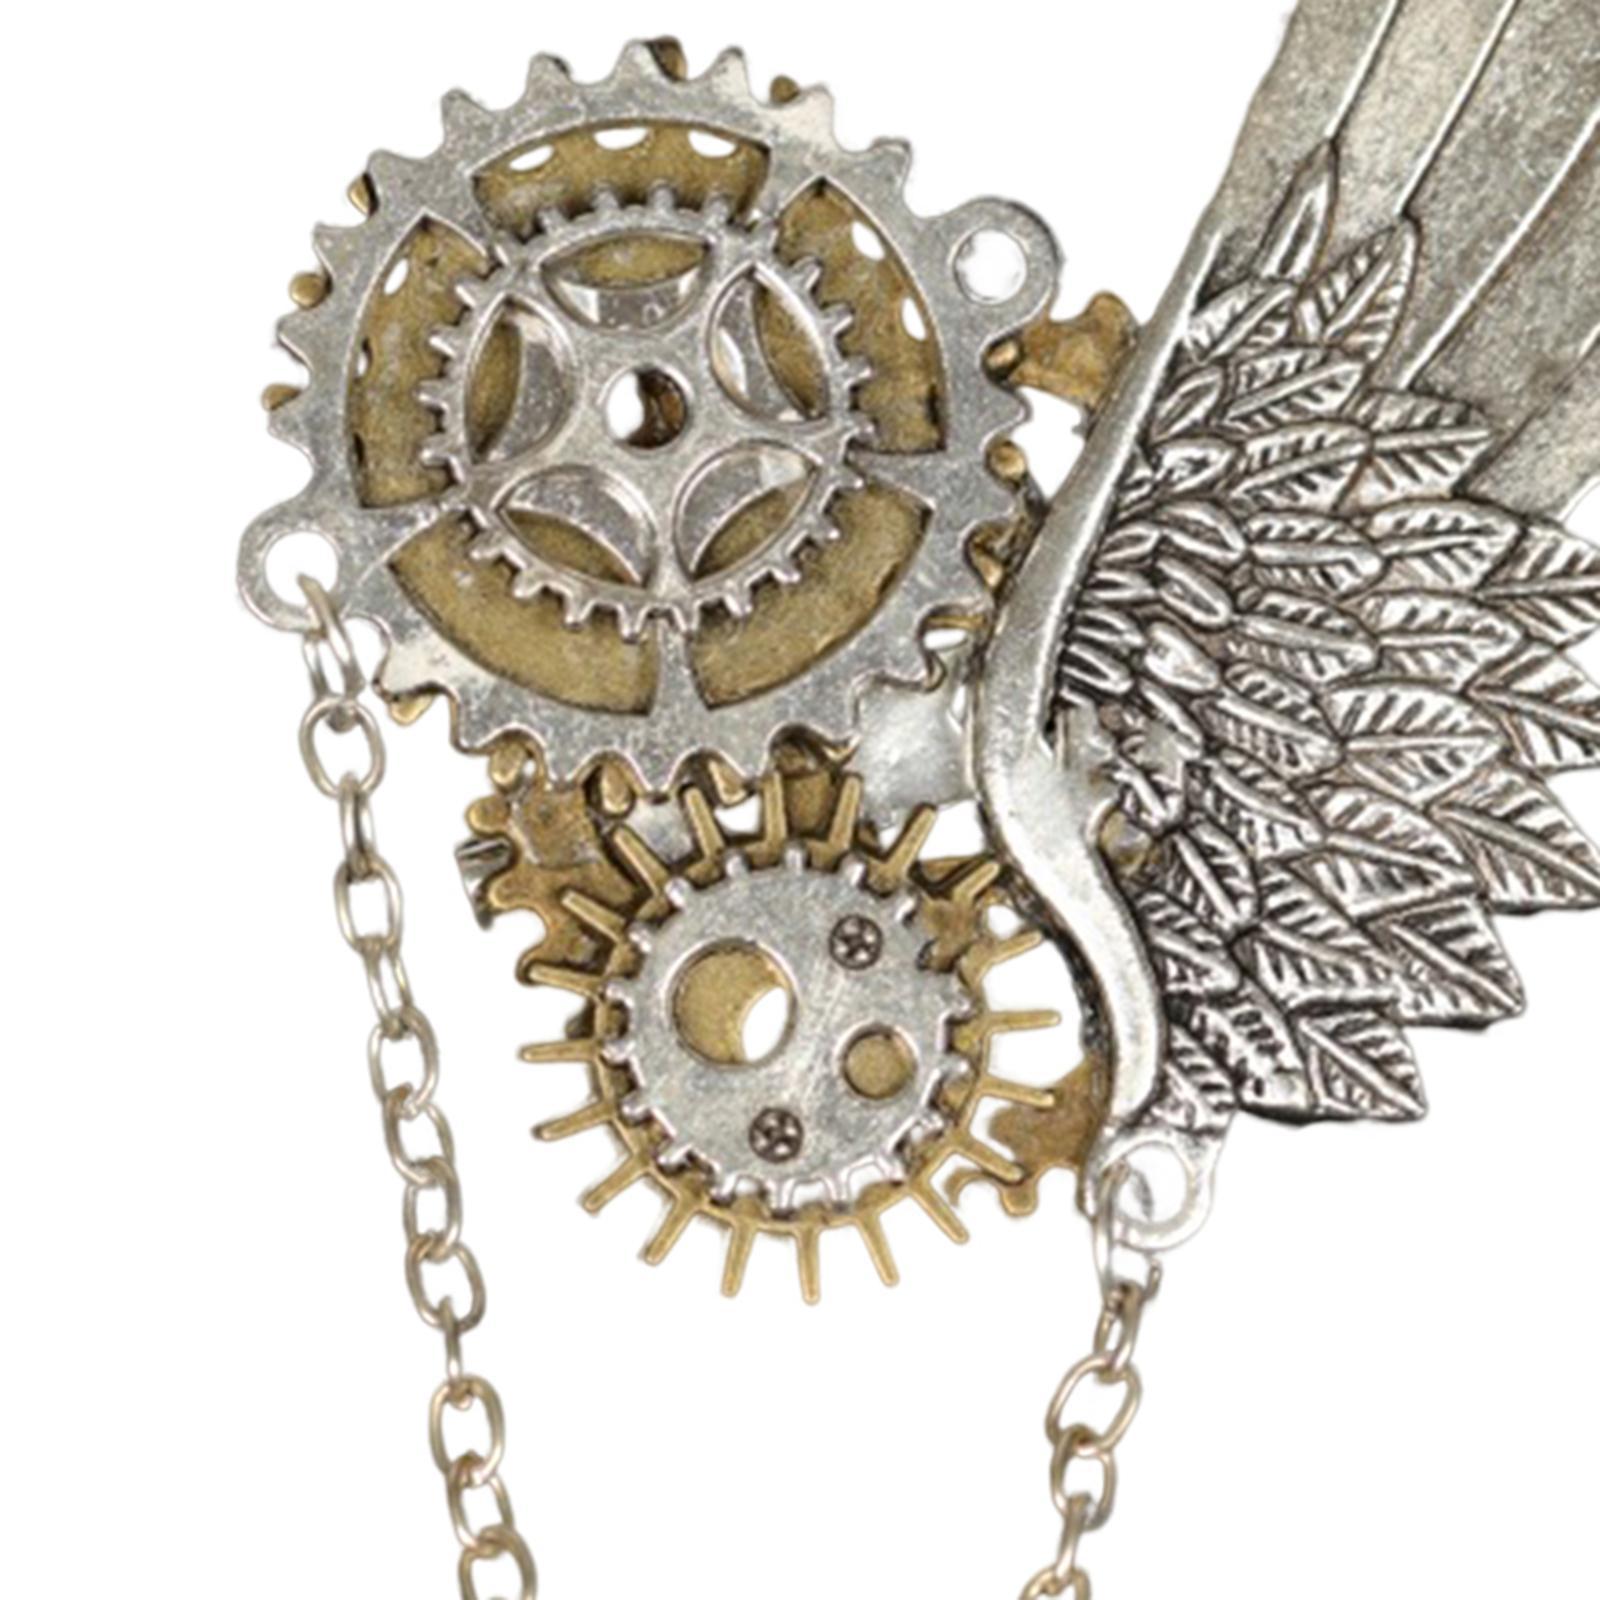 Angel Wing Brooch Metal Decorative Halloween Costume Hanging Chain Brooches